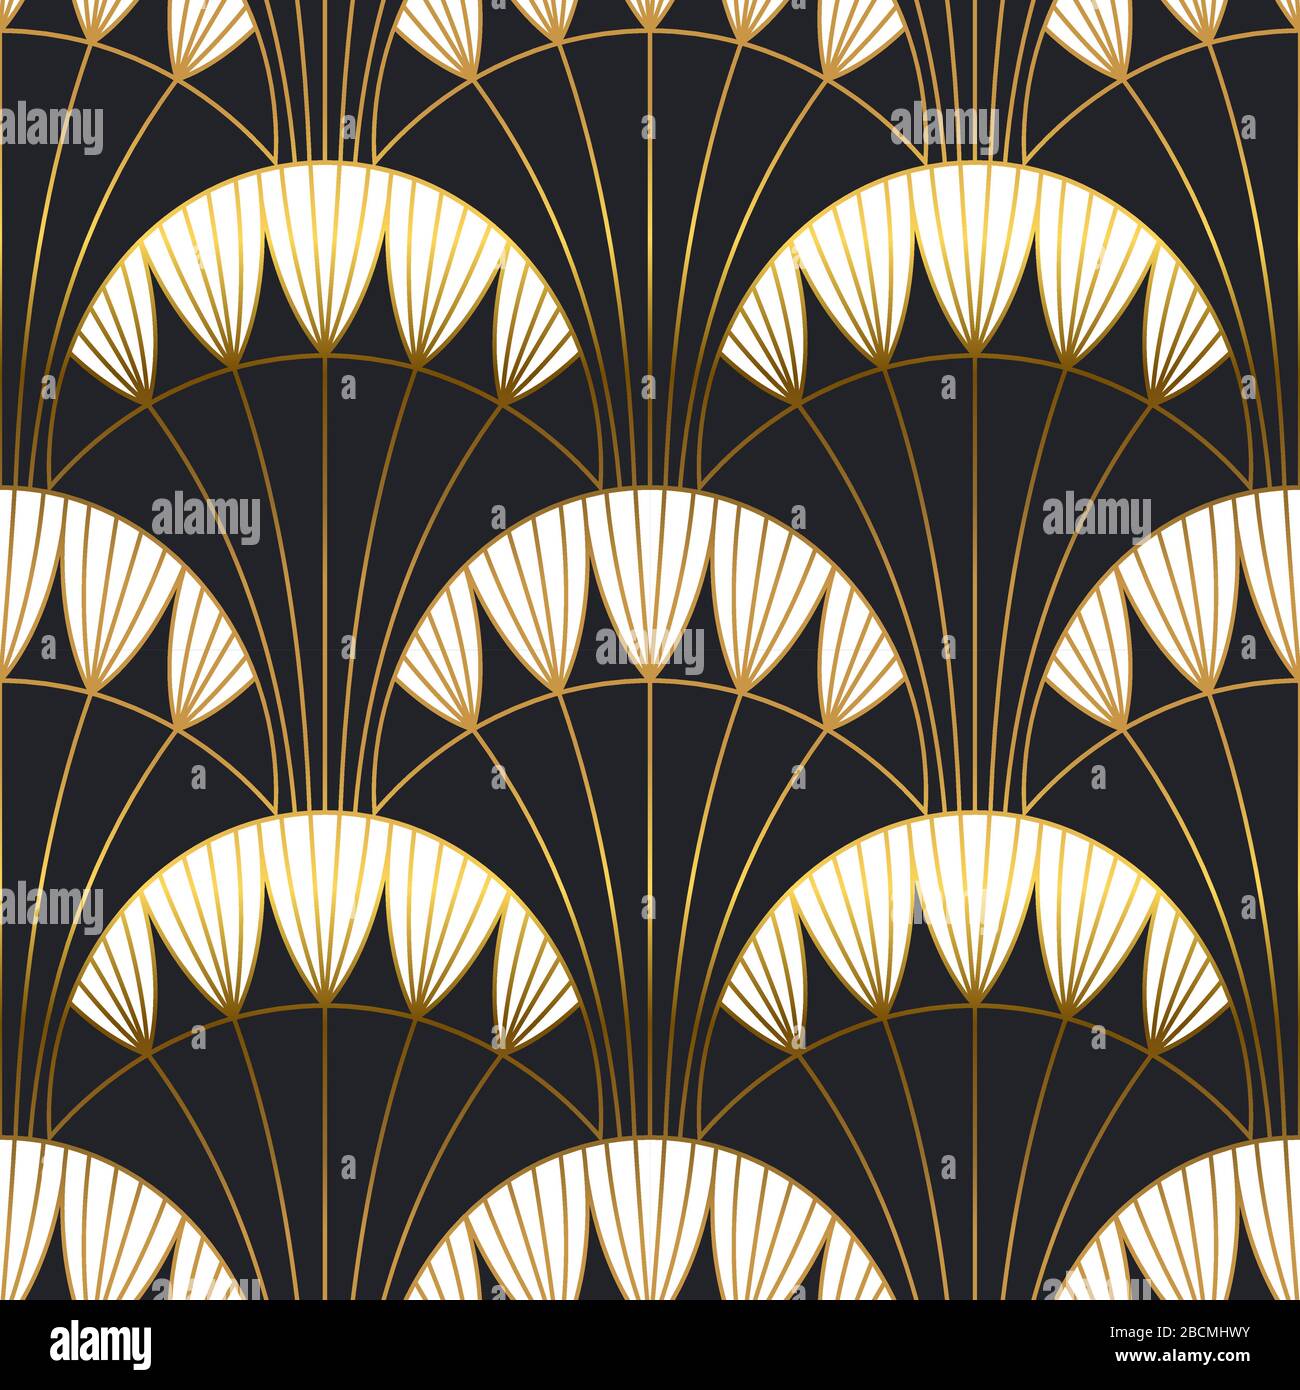 Abstract outline contour design in pattern style. Luxury art deco